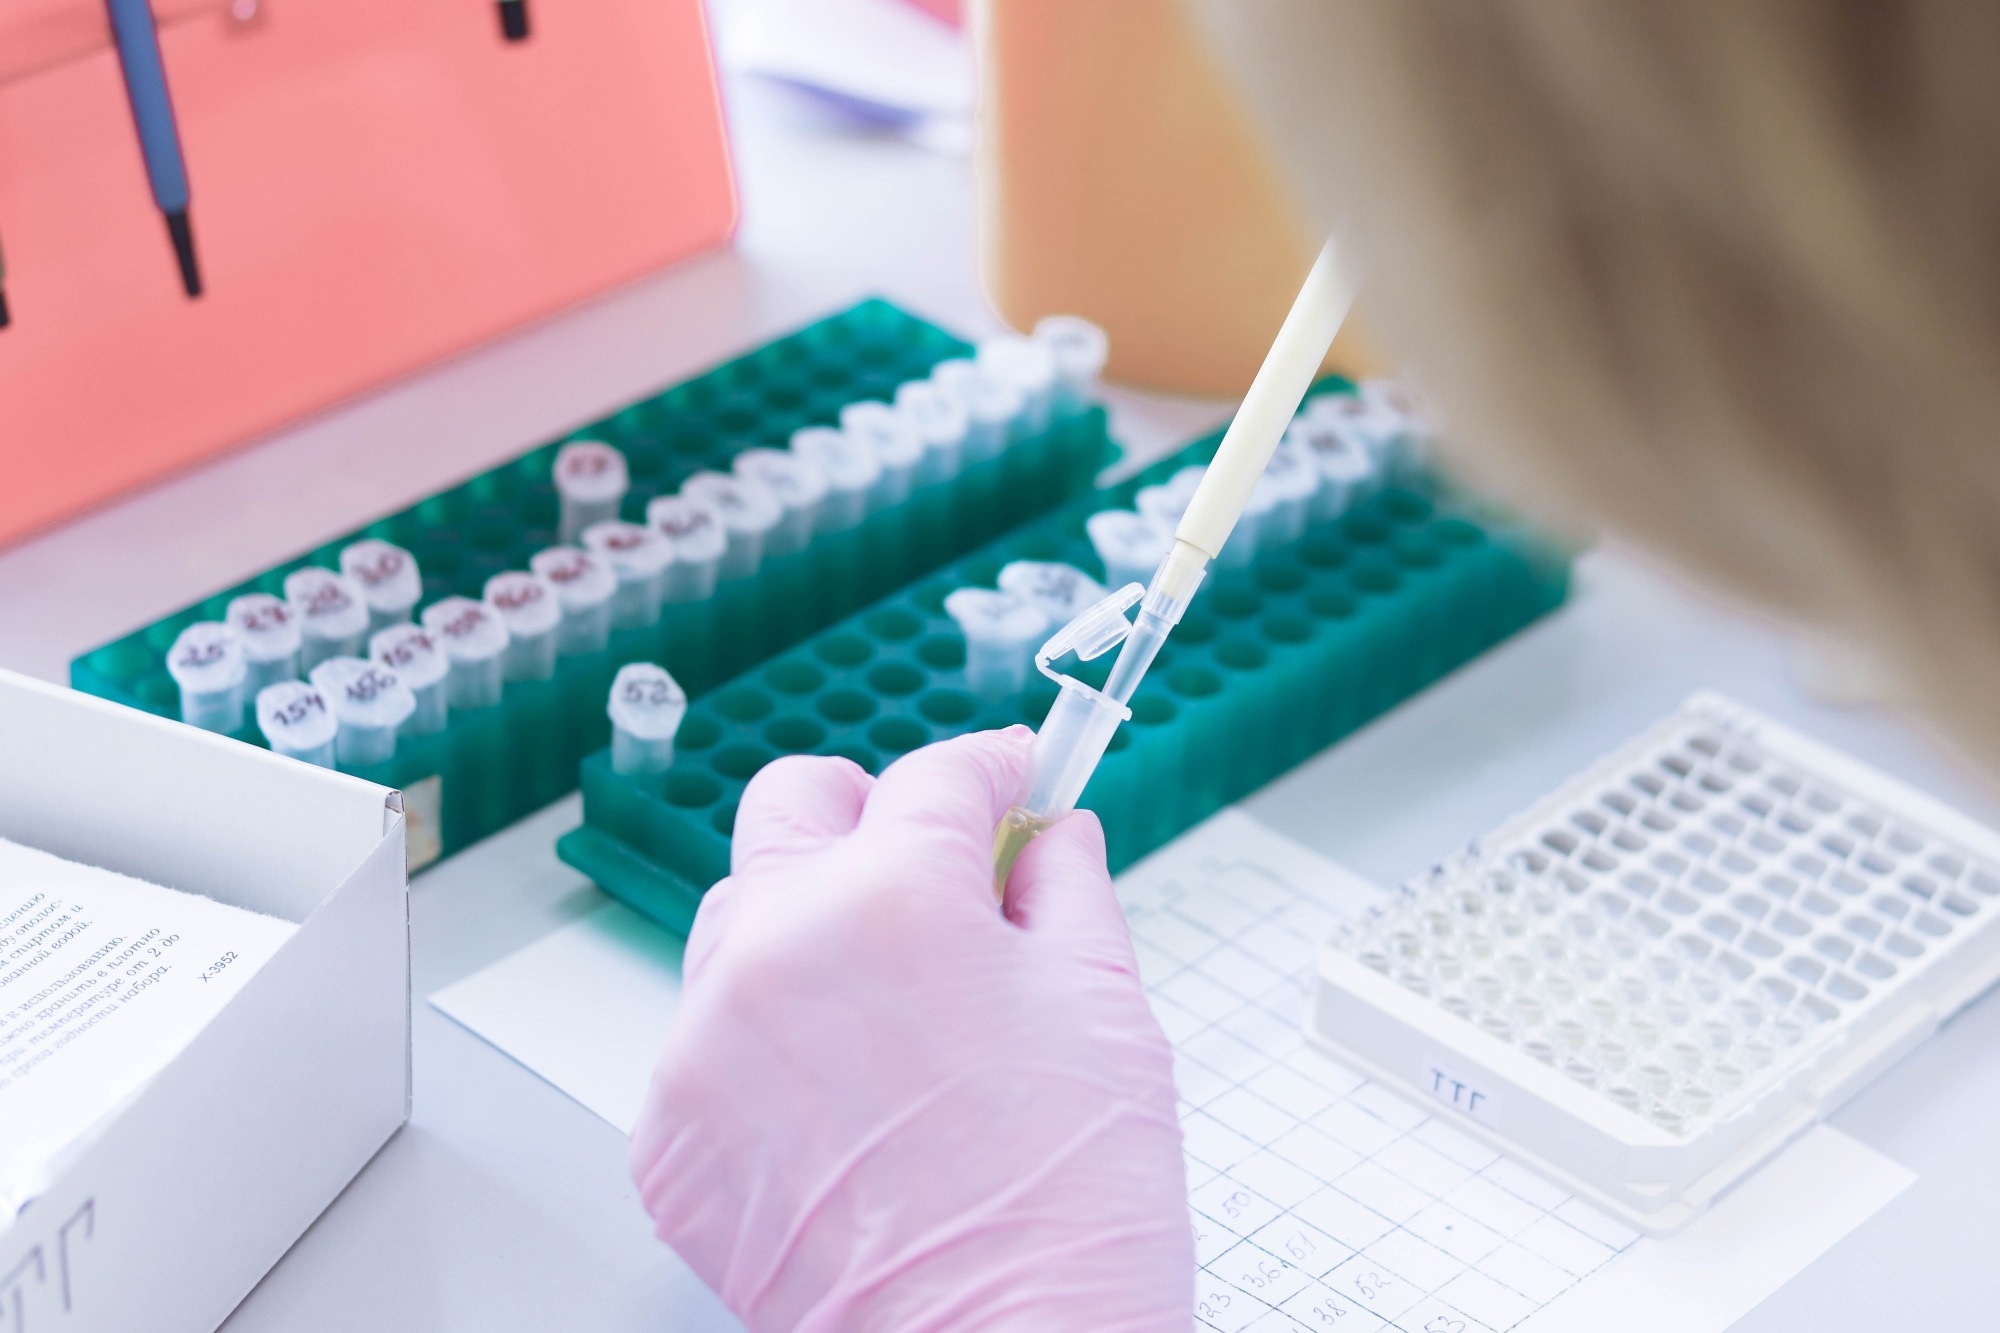 Study: Unlocking the potential of allogeneic Vδ2 T cells for ovarian cancer therapy through CD16 biomarker selection and CAR/IL-15 engineering. Image Credit: Tati9/Shutterstock.com